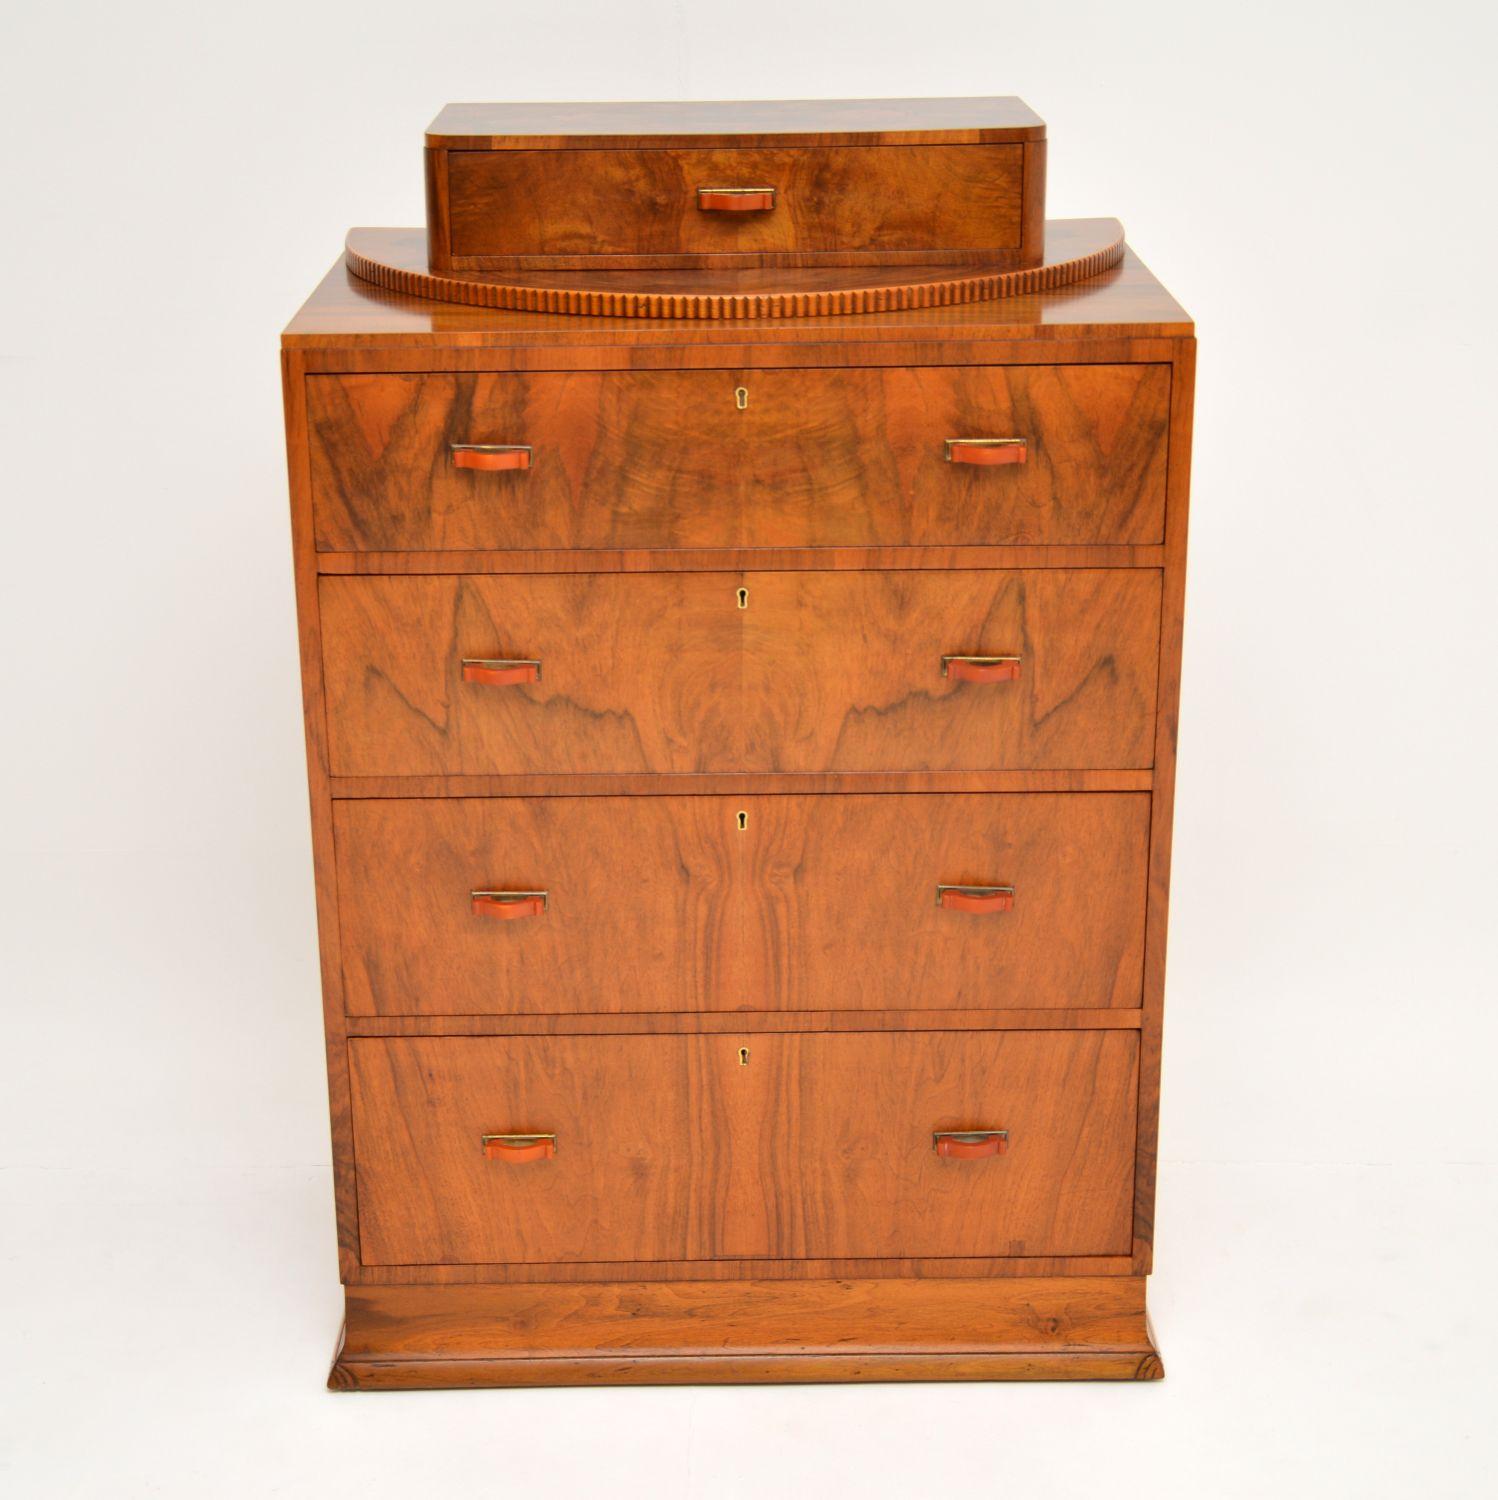 A gorgeous and unusual original Art Deco period chest of drawers. This is beautifully made from walnut, it dates from the 1920s-1930s.

The design is lovely, with a typical symmetrical Art Deco shape, and an interesting smaller upper drawer on the